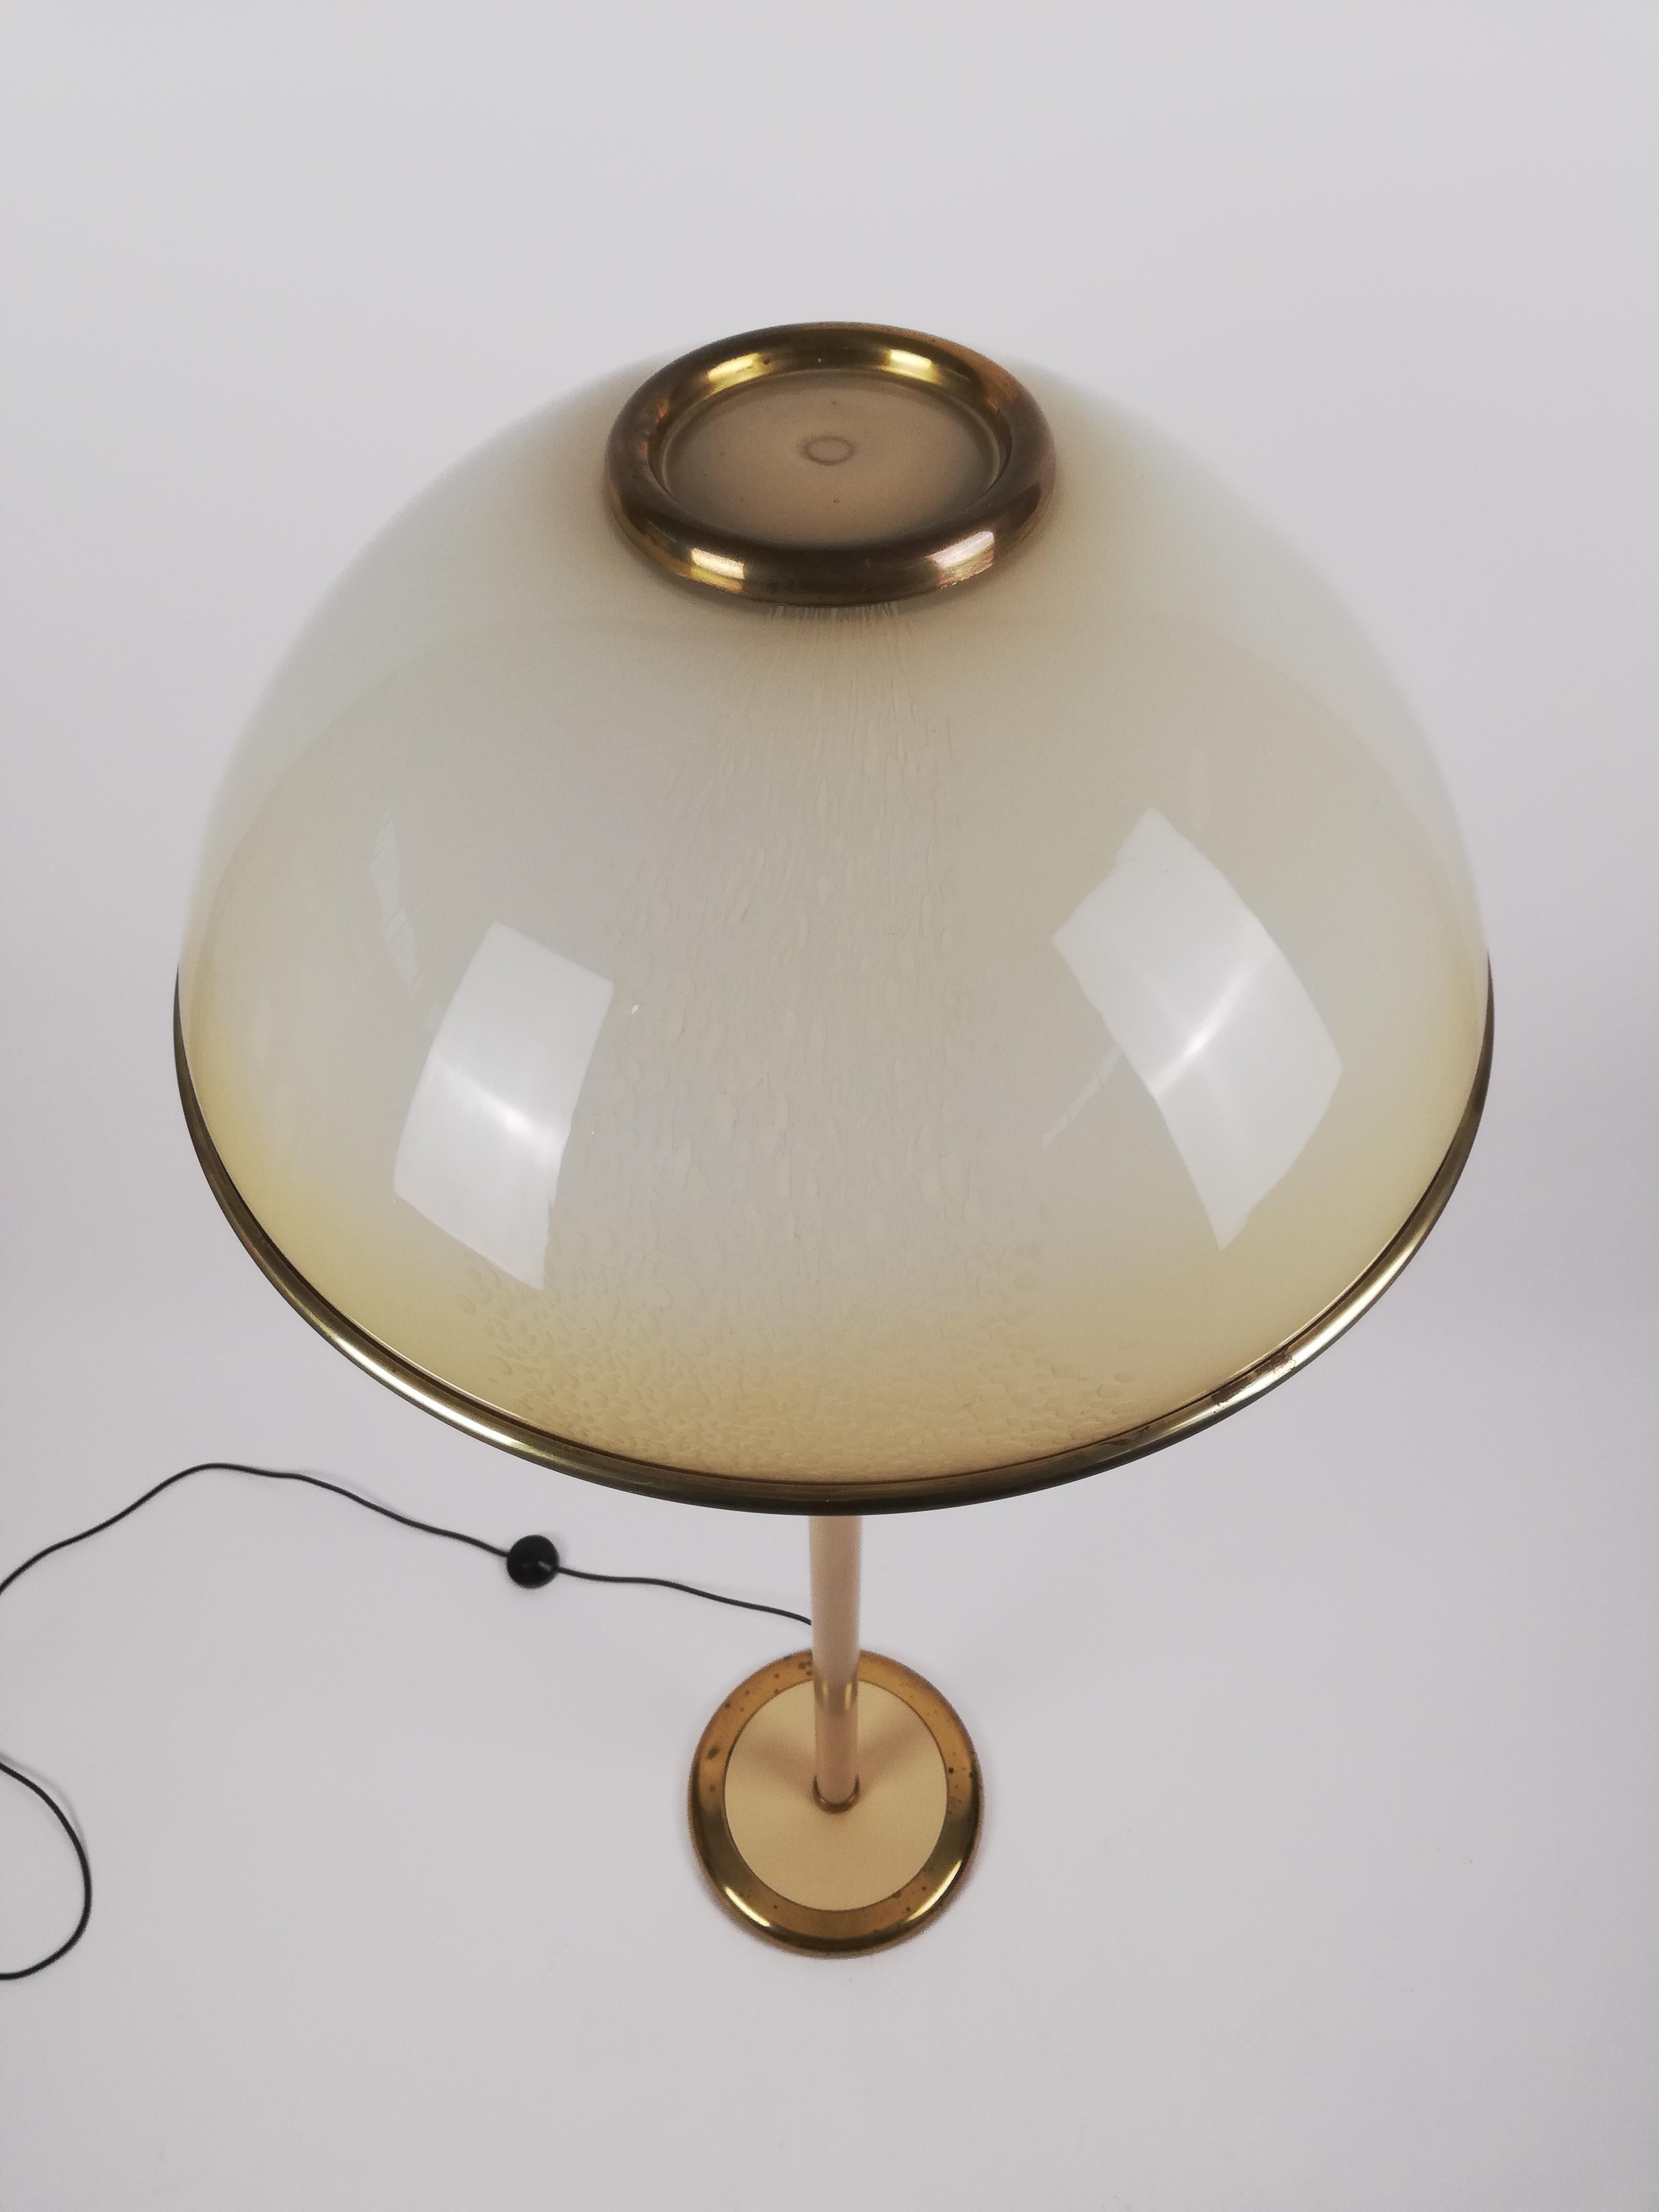 1970s Italian Floor Lamp in Brass and Artistic Murano Glass by F. Fabbian For Sale 6